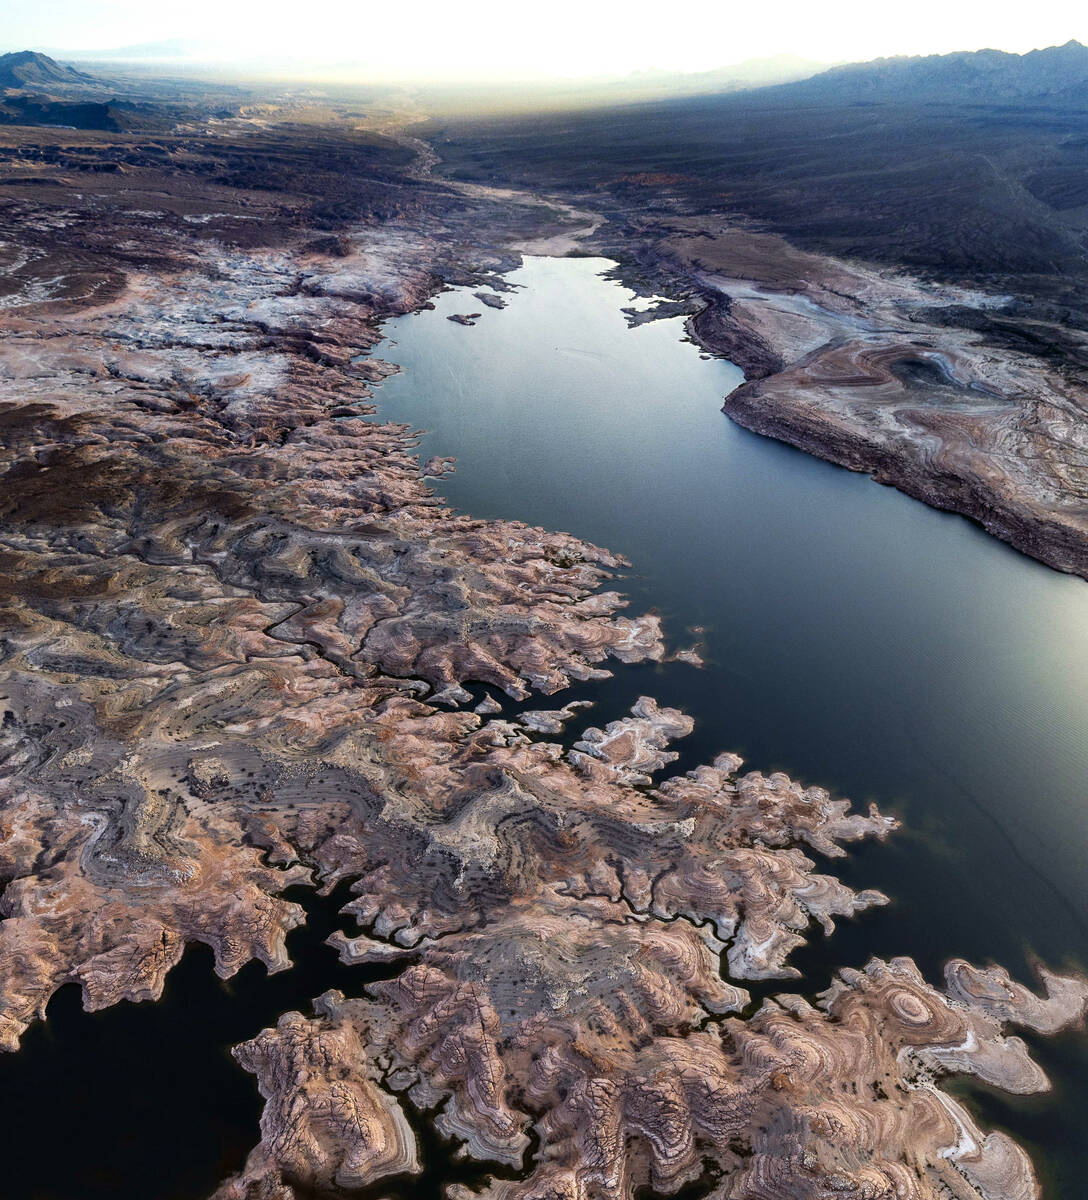 The receding Lake Mead shoreline late day creates an artistic pattern above the "Narrows&q ...